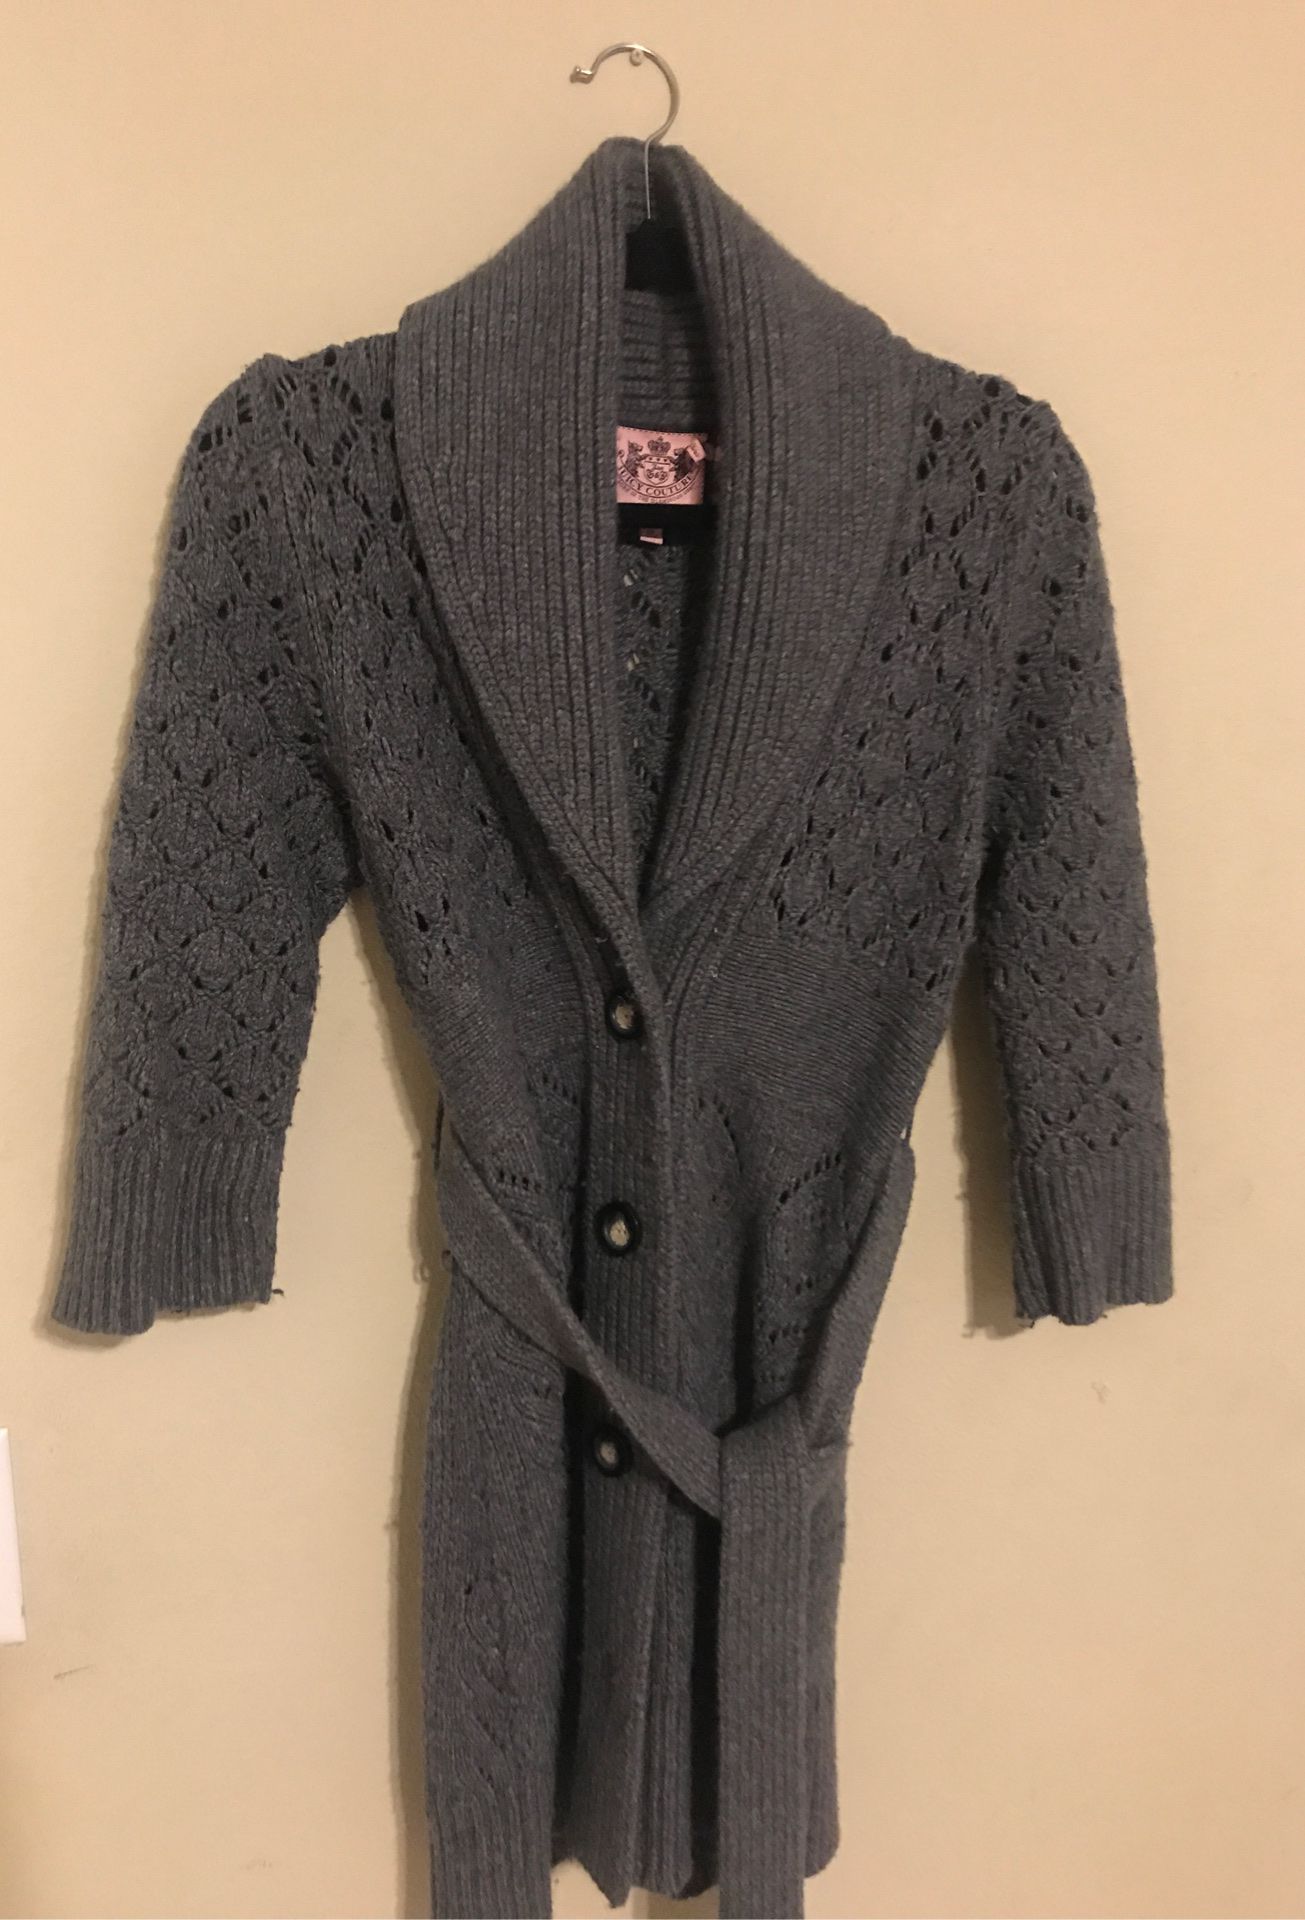 Juicy Couture tunic style sweater